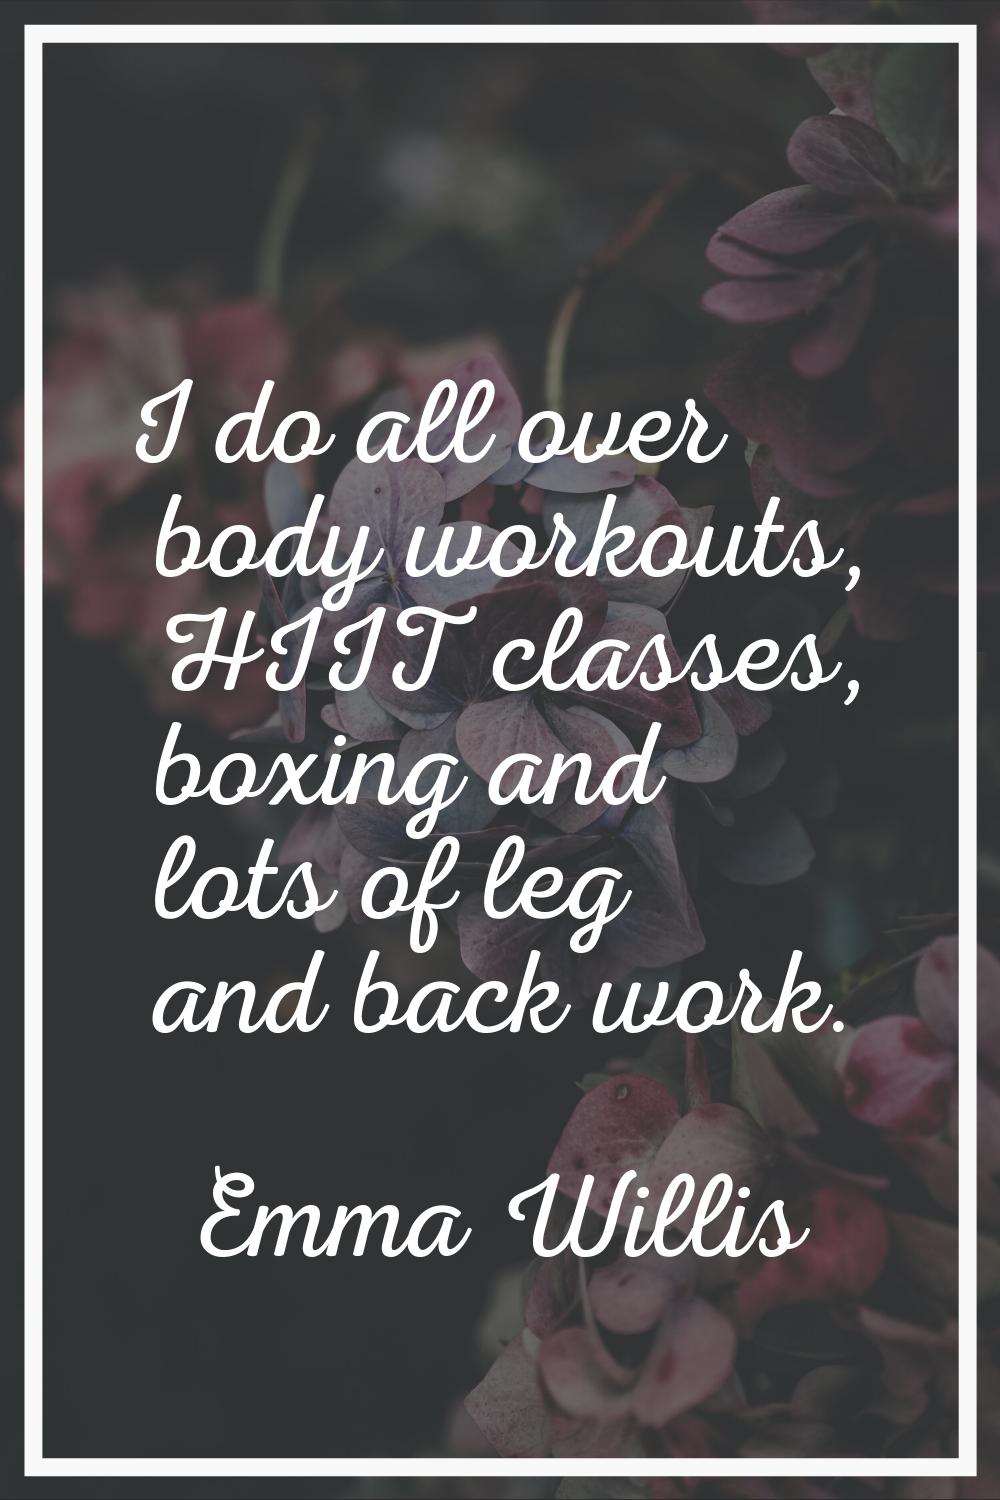 I do all over body workouts, HIIT classes, boxing and lots of leg and back work.